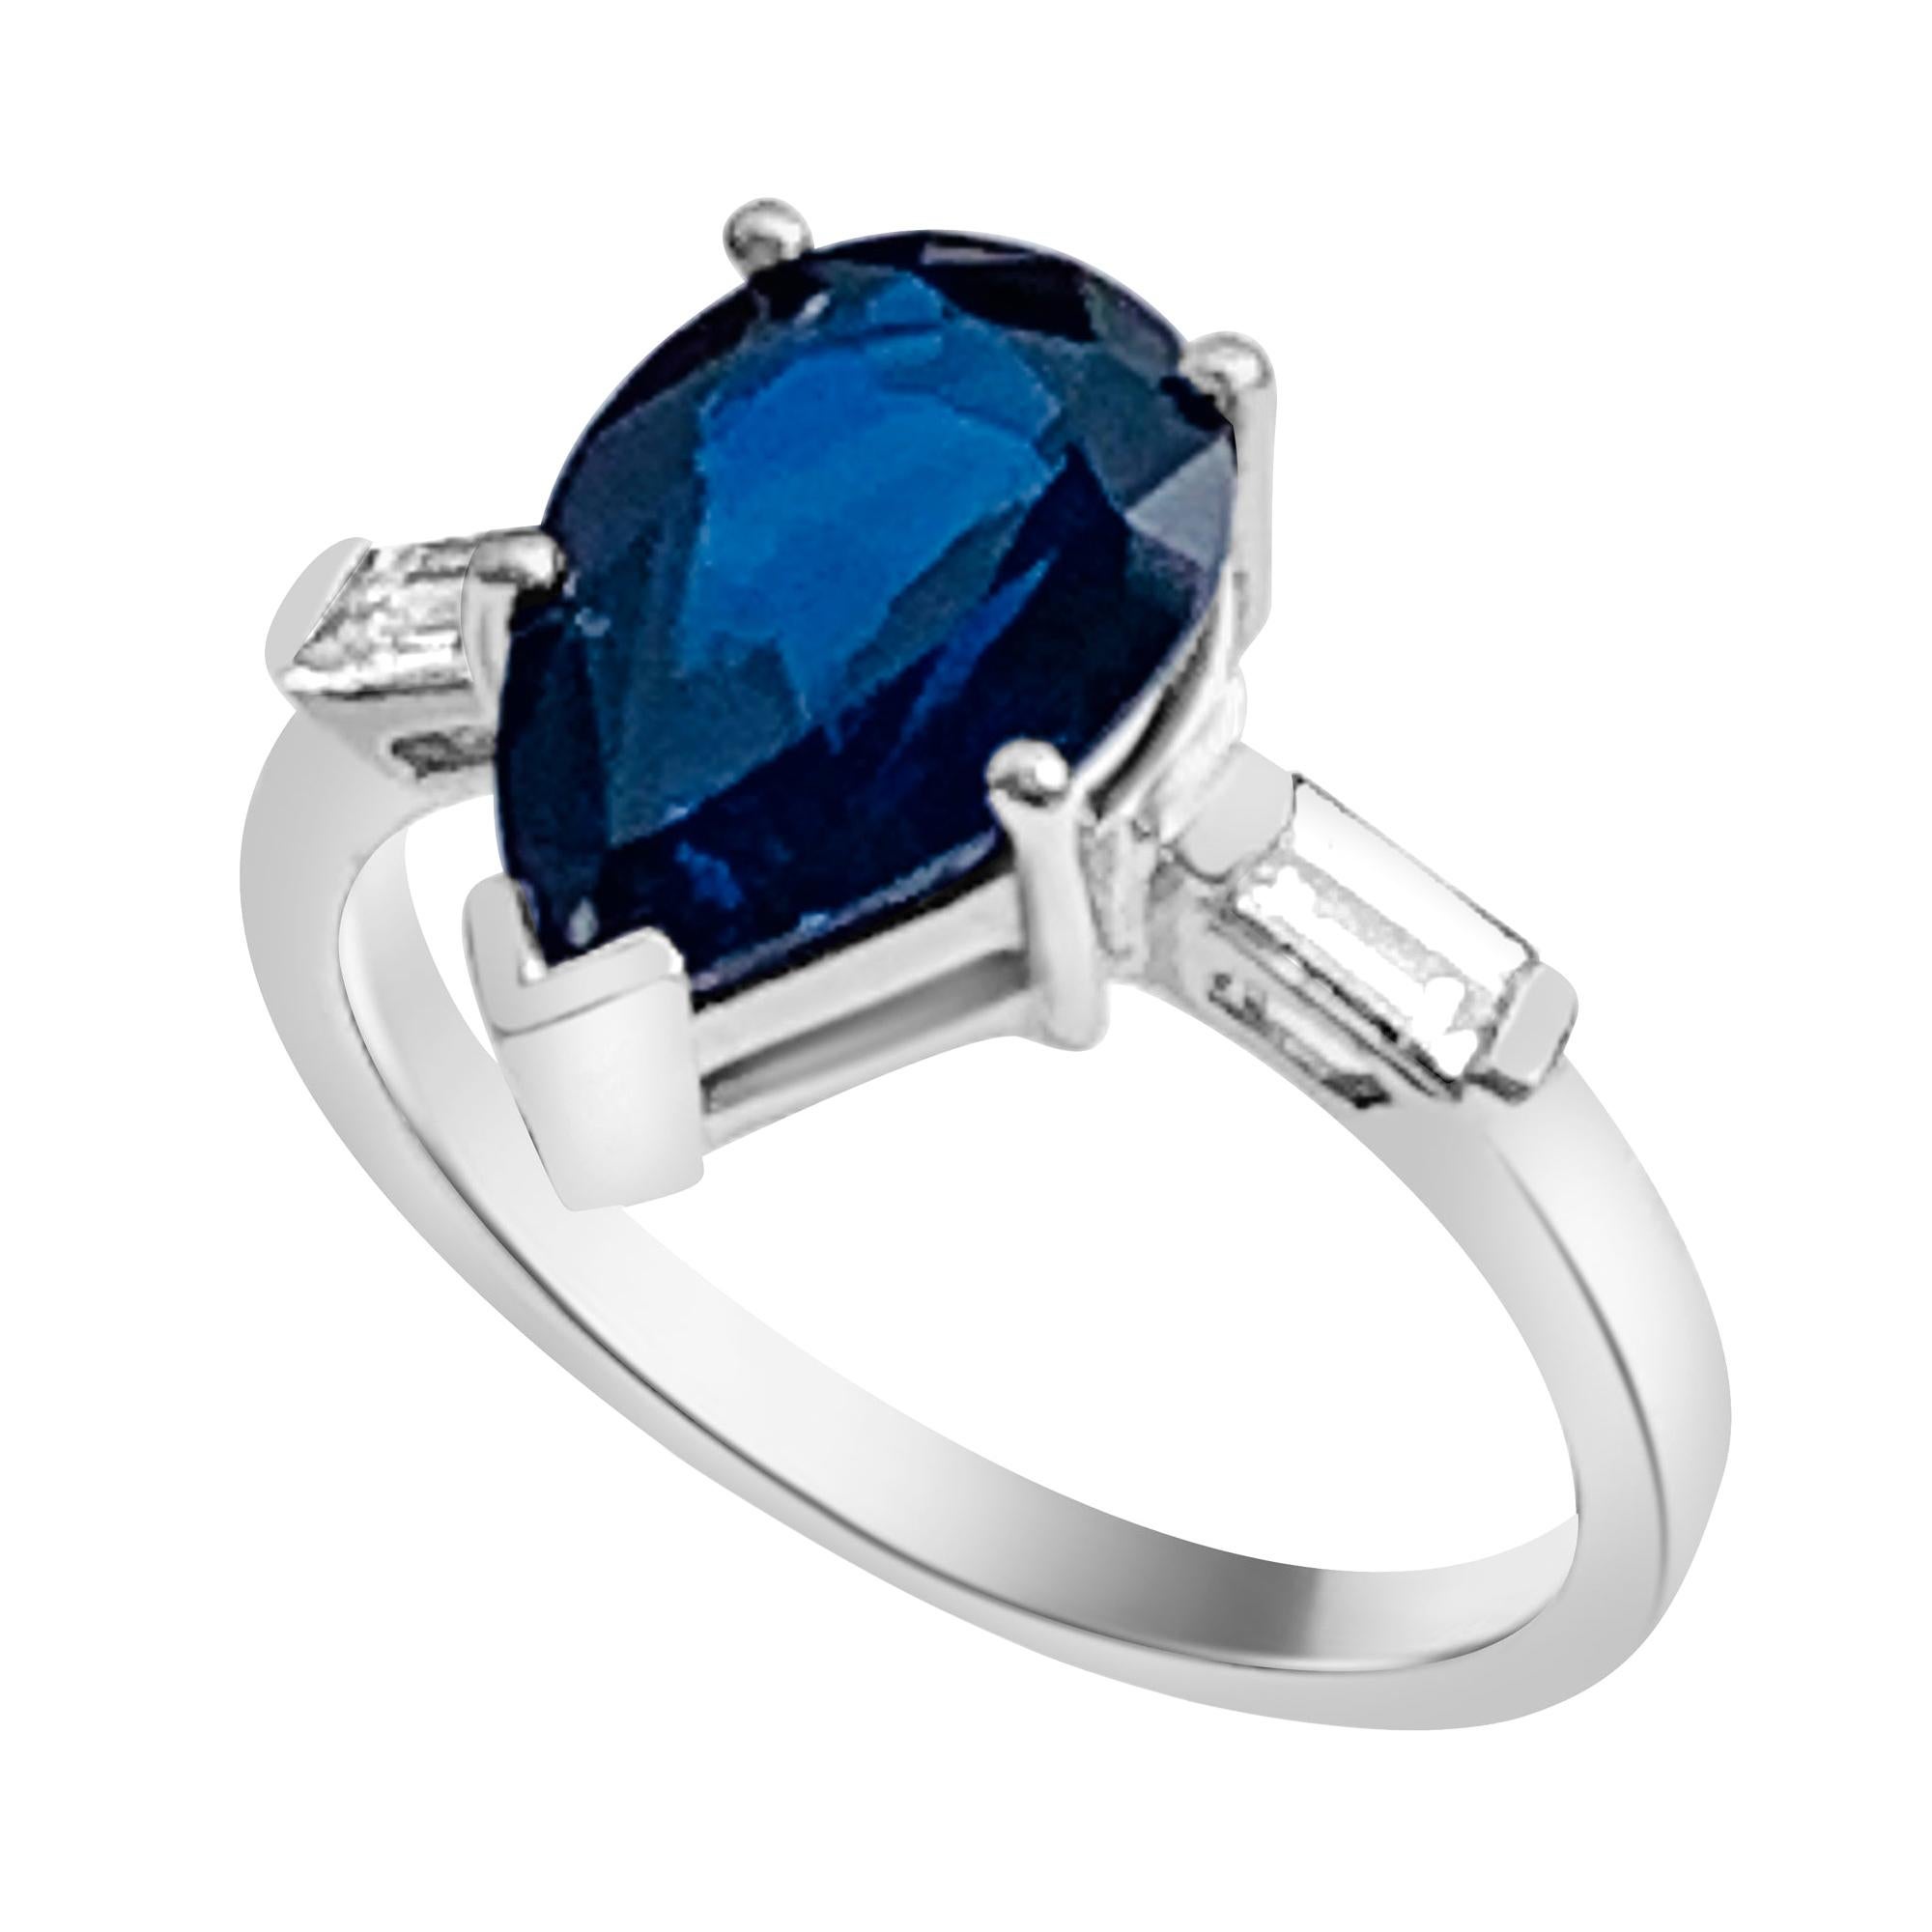 Pear Shape Unheated Blue Sapphire Ring GIA Certified 4.20 Carat in Platinum